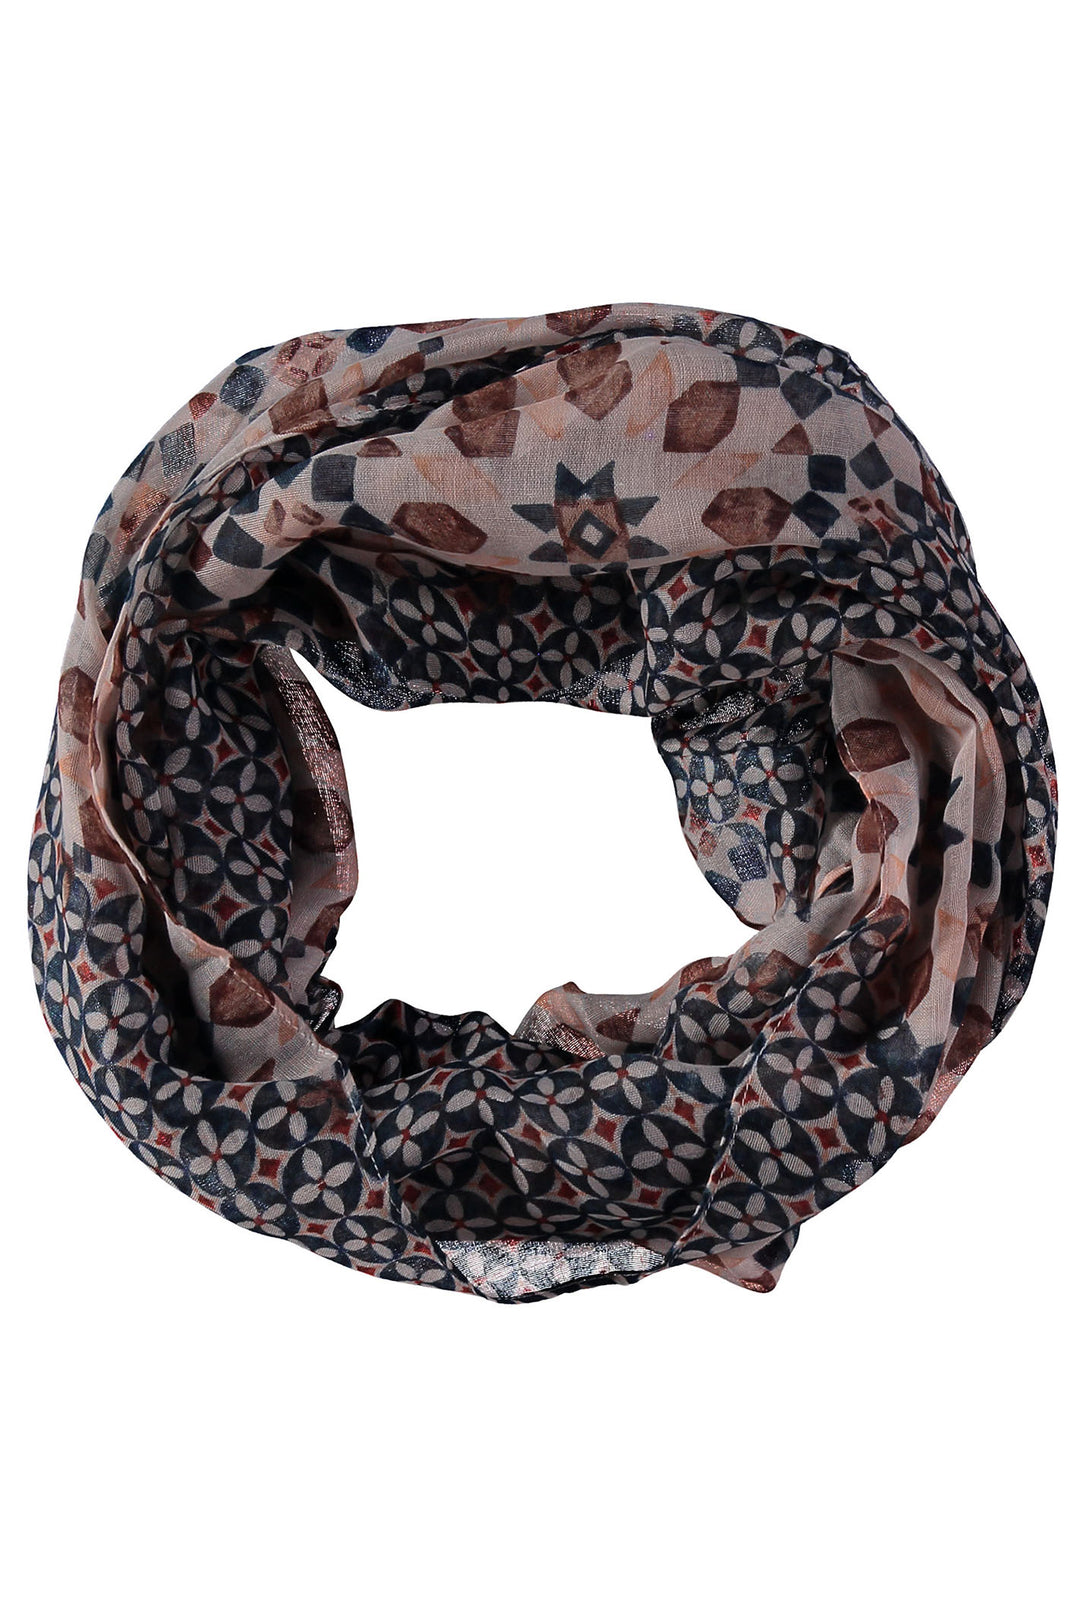 Gerry Weber 301029 72044 9088 Navy Mosaic Print Scarf - Experience Boutique